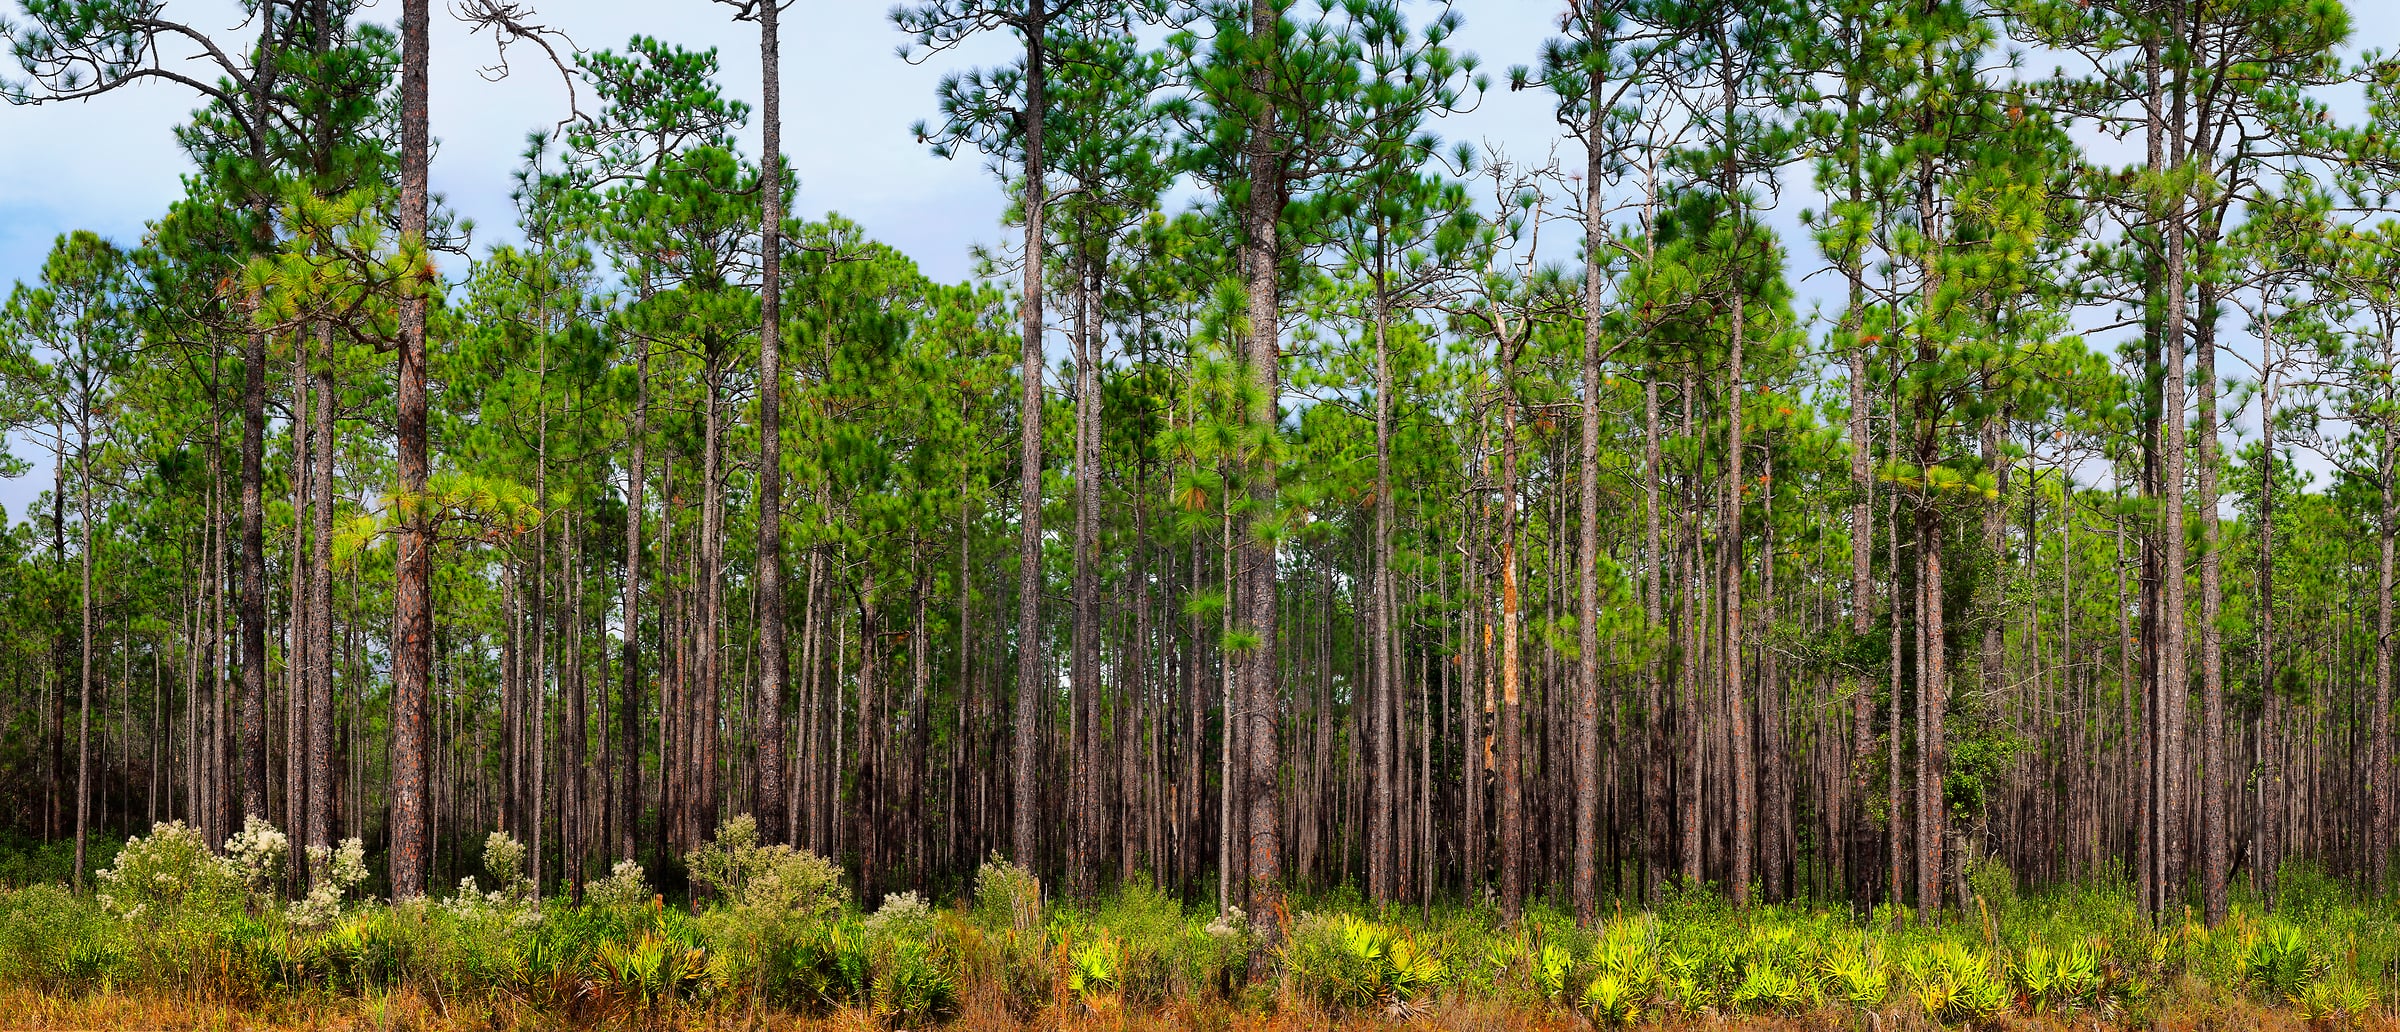 236 megapixels! A very high resolution, large-format VAST photo print of a Florida pine tree forest; nature photograph created by Phil Crawshay in Cary State Forest, Bryceville, Florida.